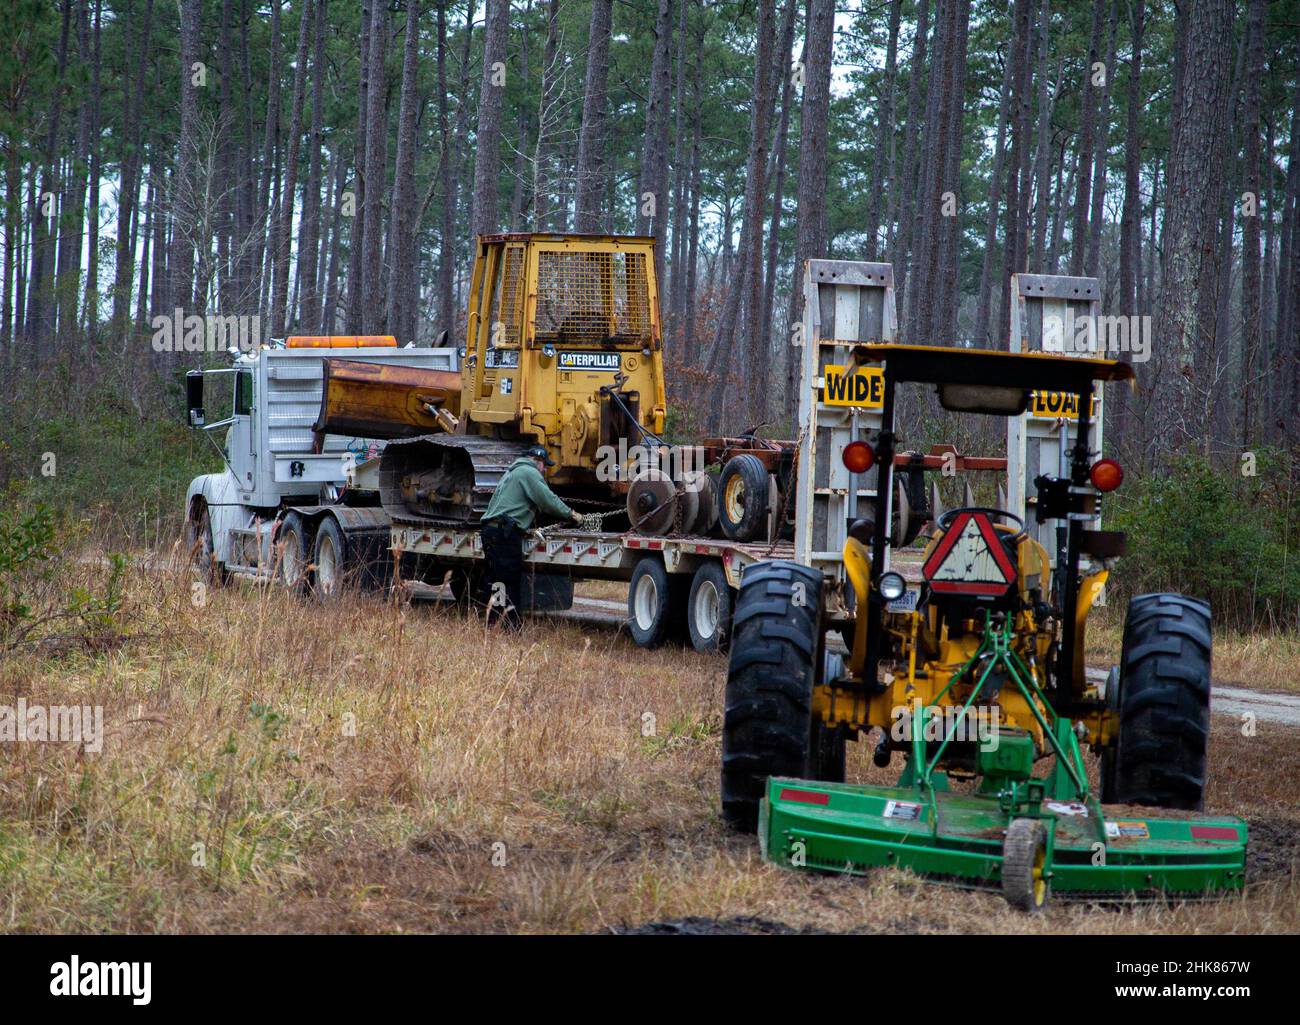 Glenn Catoe, a conservation law enforcement officer and game warden, unloads a small D4 dozer and a heavy forestry disk at Marine Corps Air Station (MCAS) Cherry Point, North Carolina, Jan. 25, 2022. The conversion is intended to promote wildlife habitat enhancement and provide recreation for MCAS Cherry Point personnel and their families. (U.S. Marine Corps photo by Lance Cpl. Symira Bostic) Stock Photo